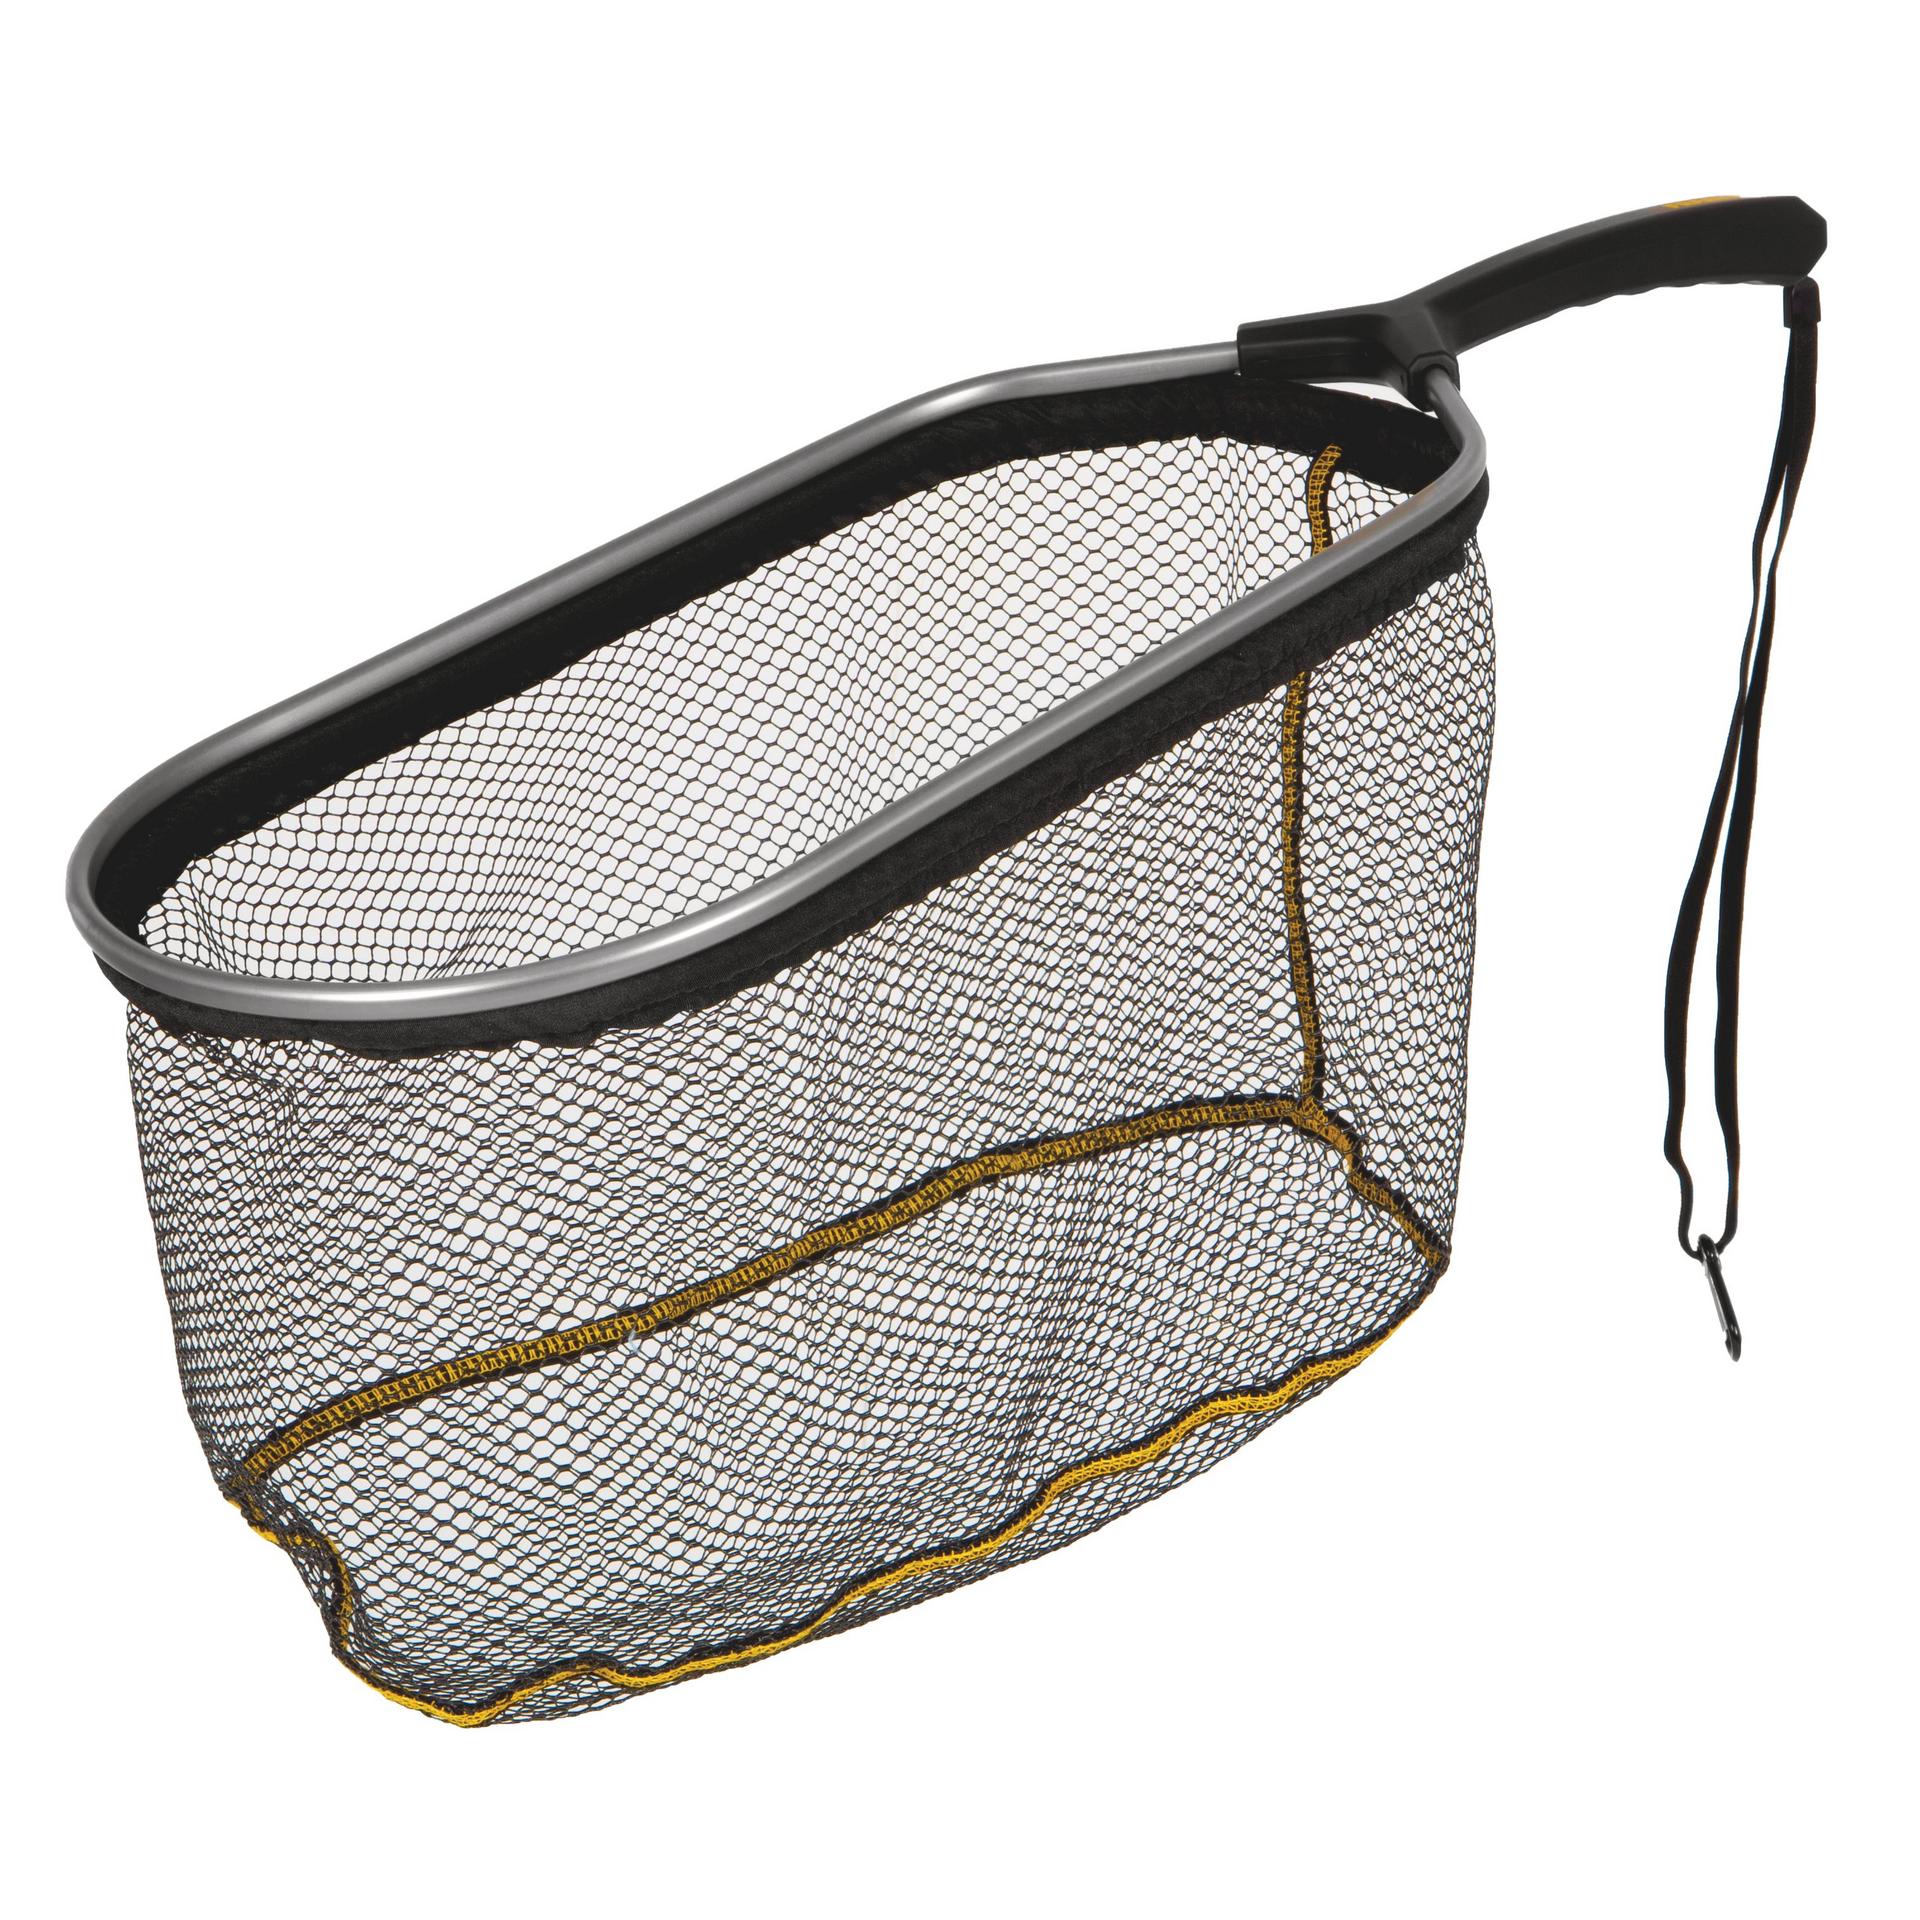 NET FRABILL FISHING Power Catch Weighted Coated Netting Multiple Hoop Sizes  $283.41 - PicClick